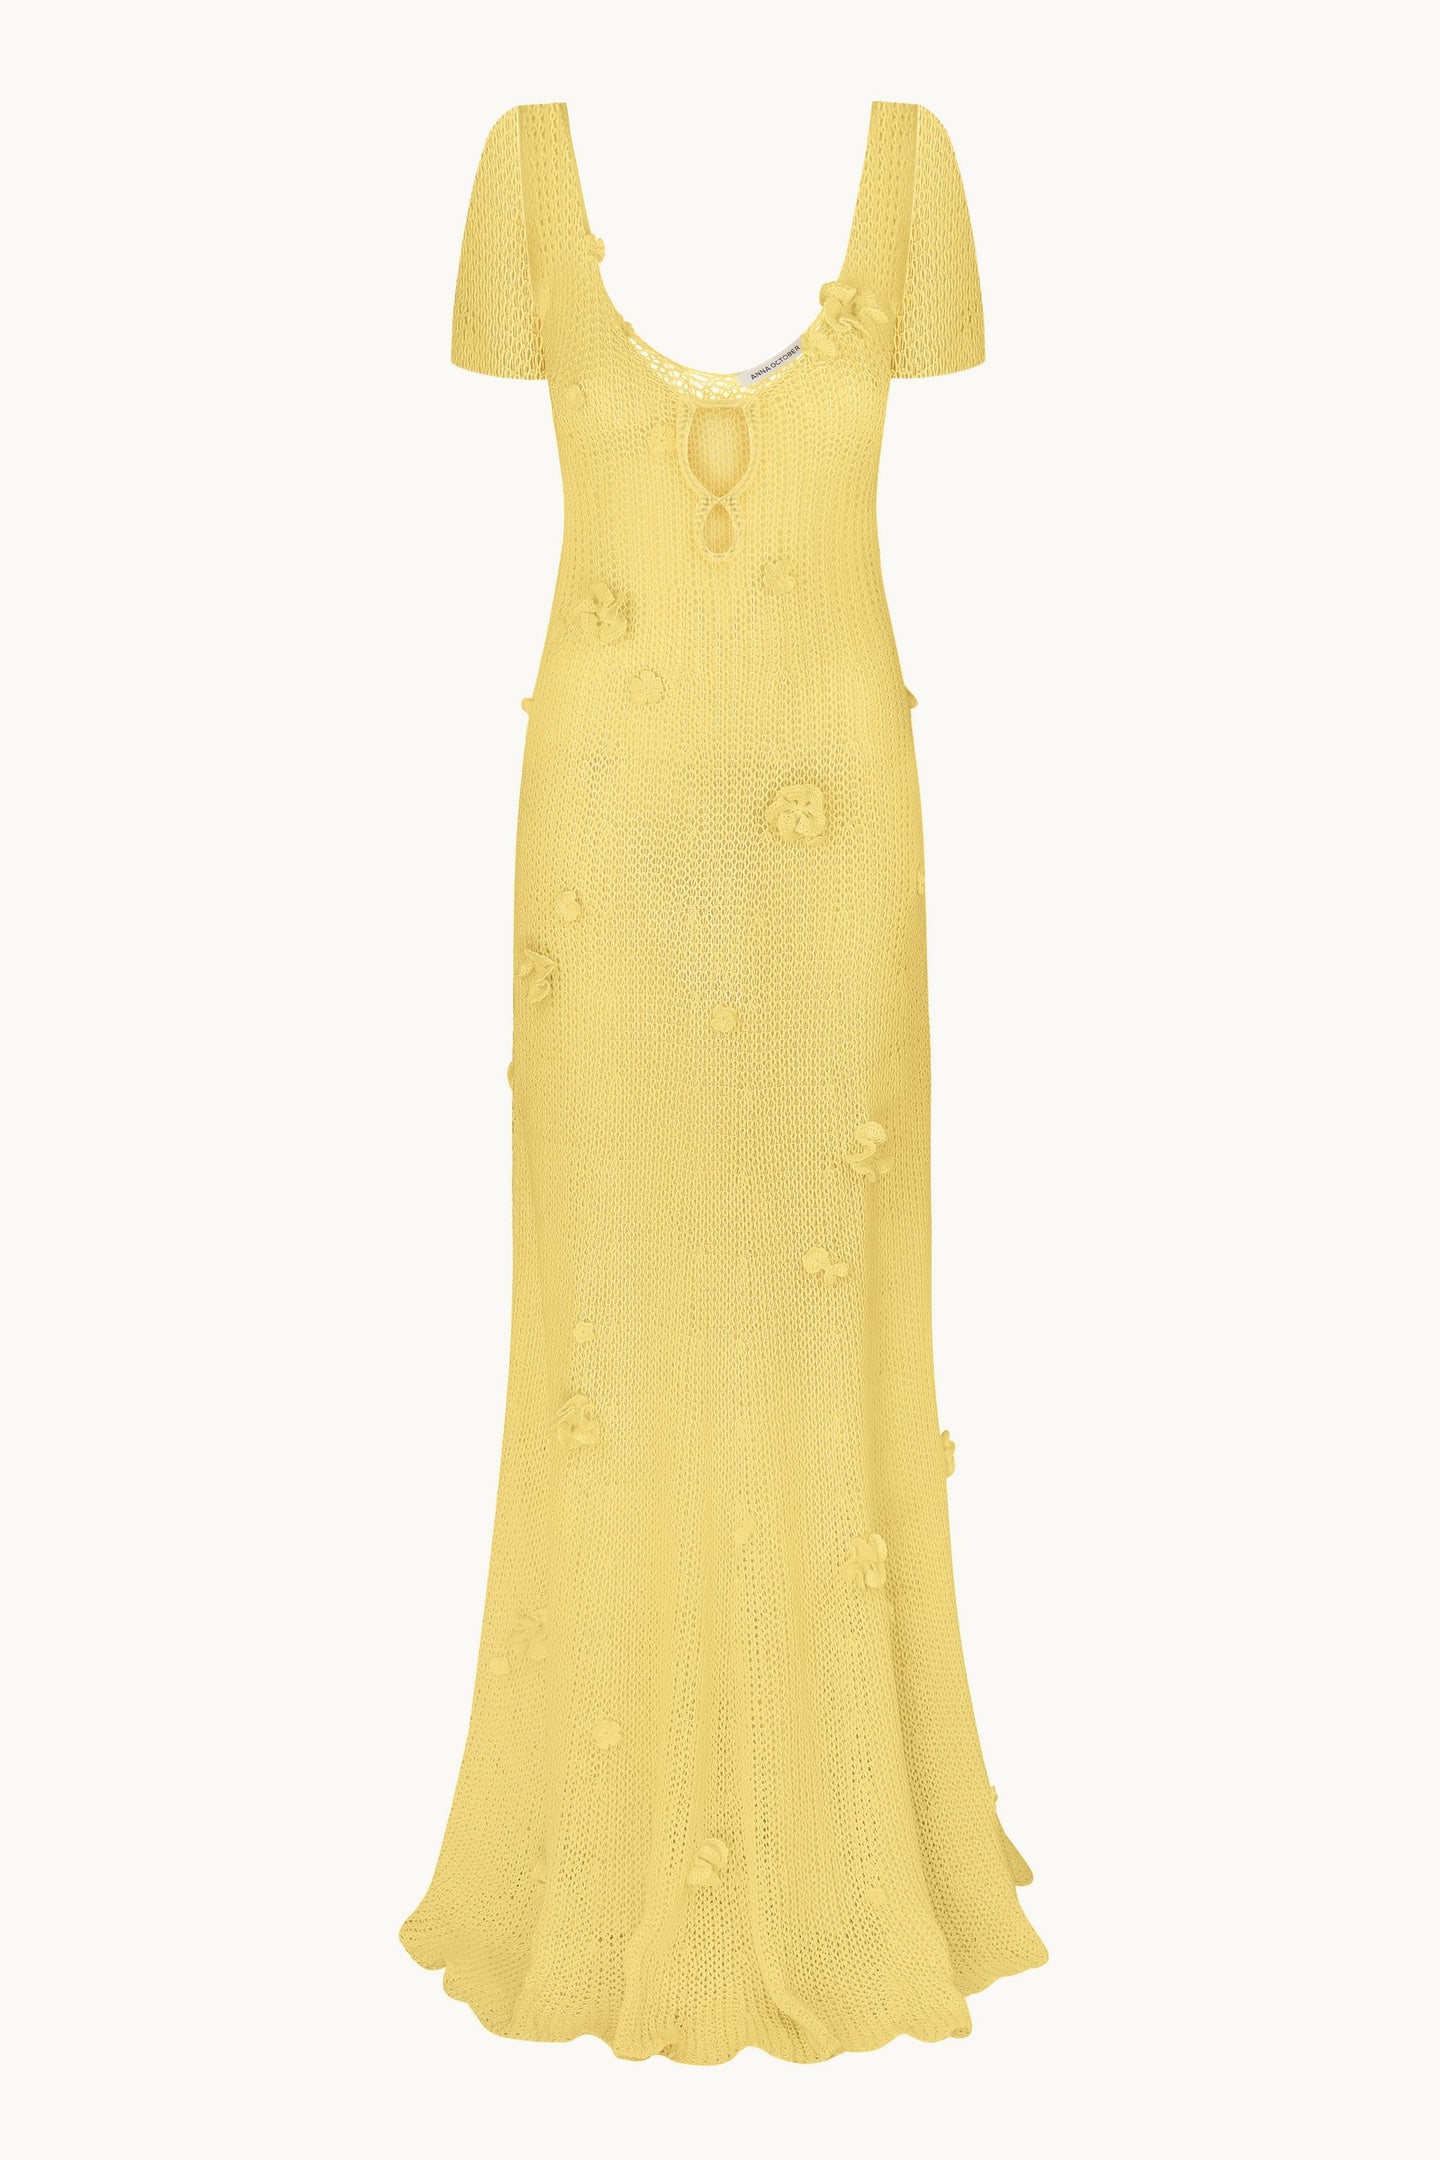 Avery yellow dress front view